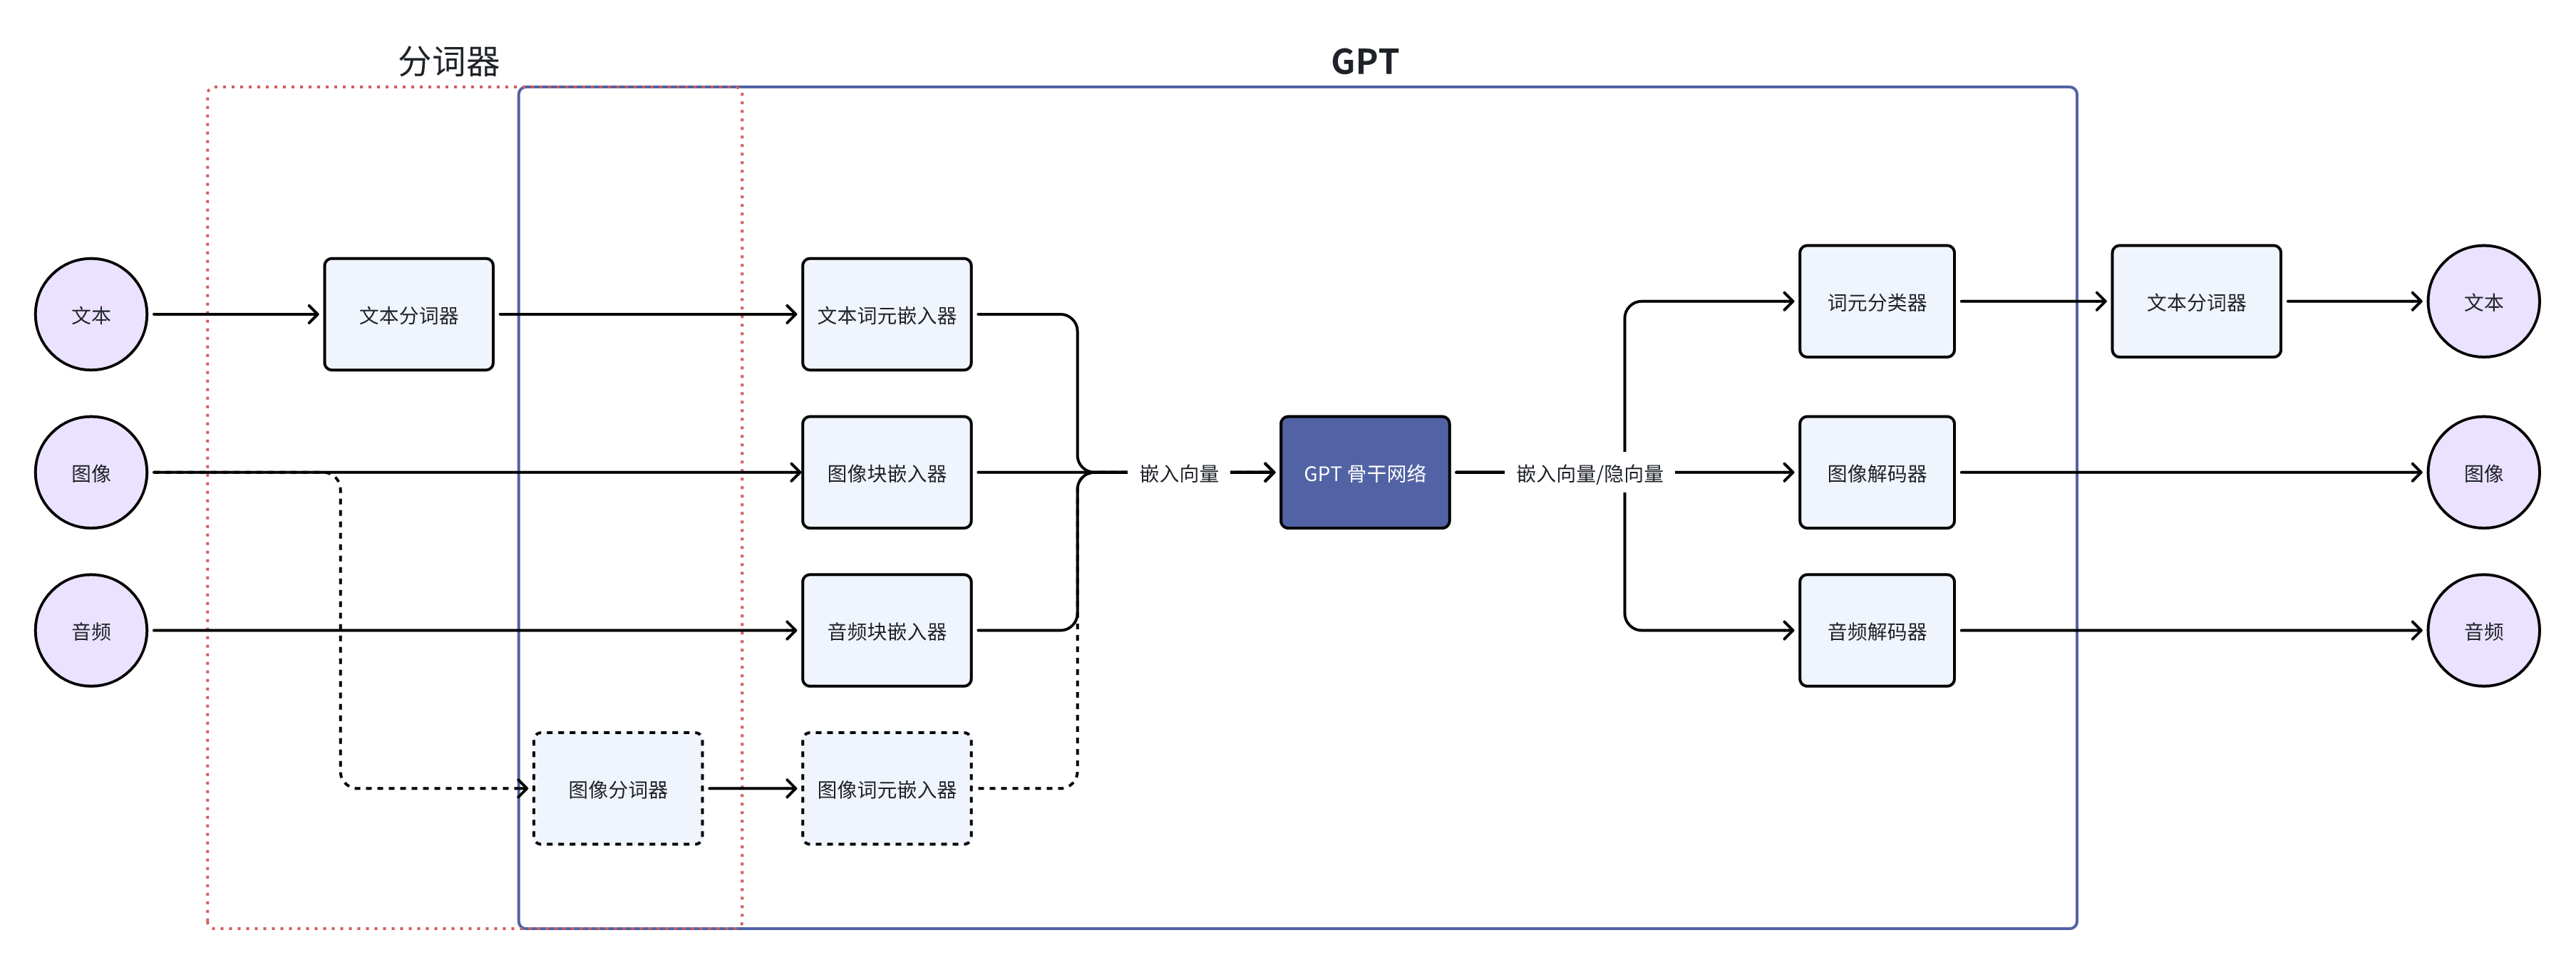 gpt_components